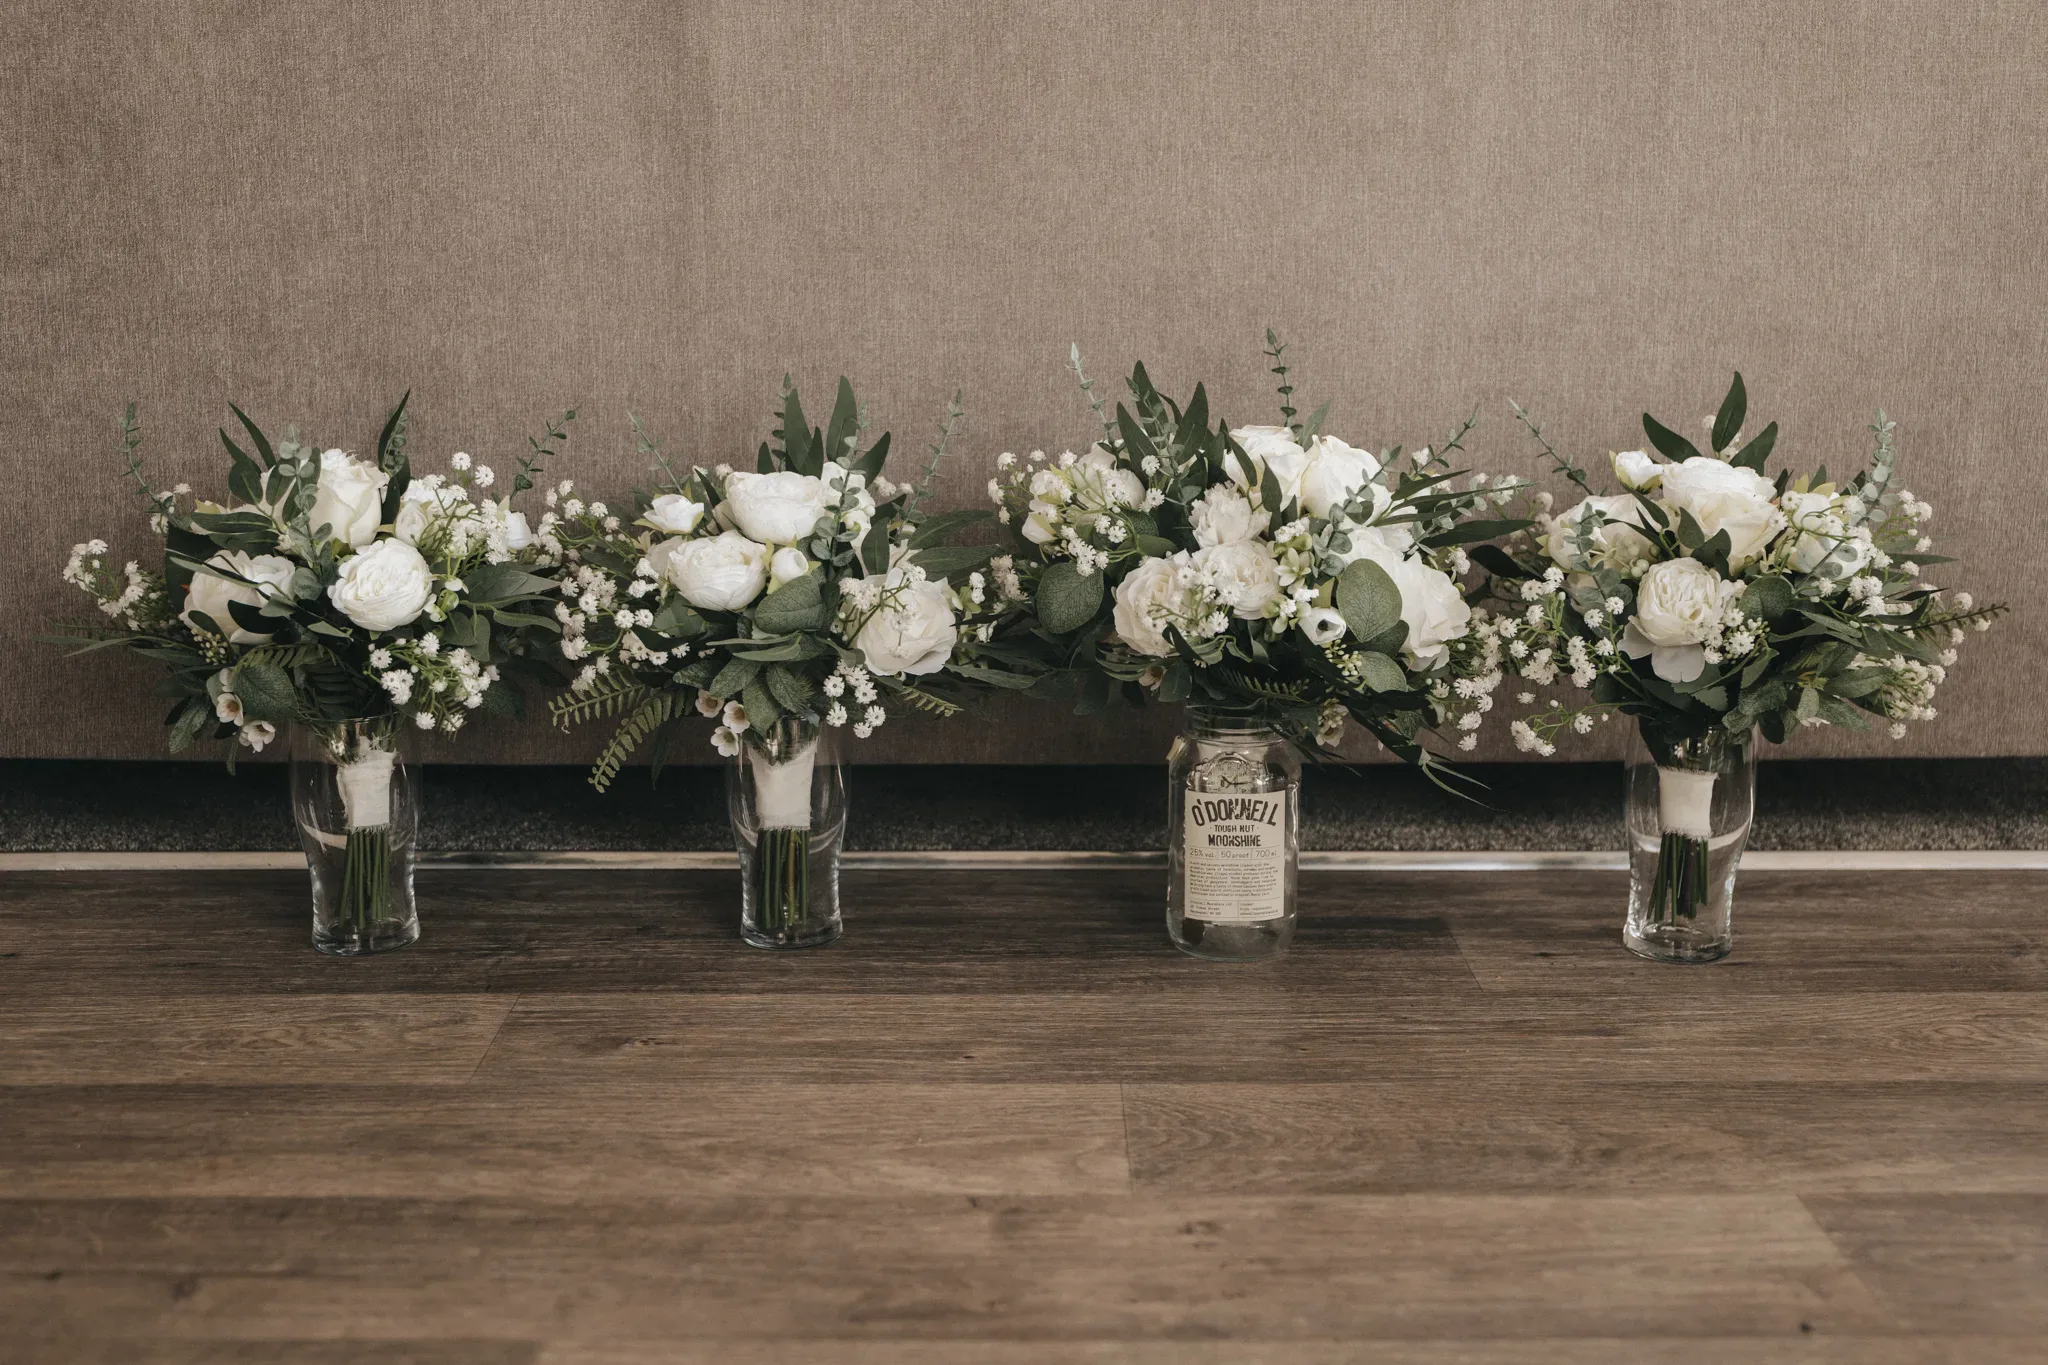 Four bouquets in glass jars, featuring white flowers and greenery, are placed on a wooden floor against a gray textured wall. one jar in the center has a "gordon's" gin label.